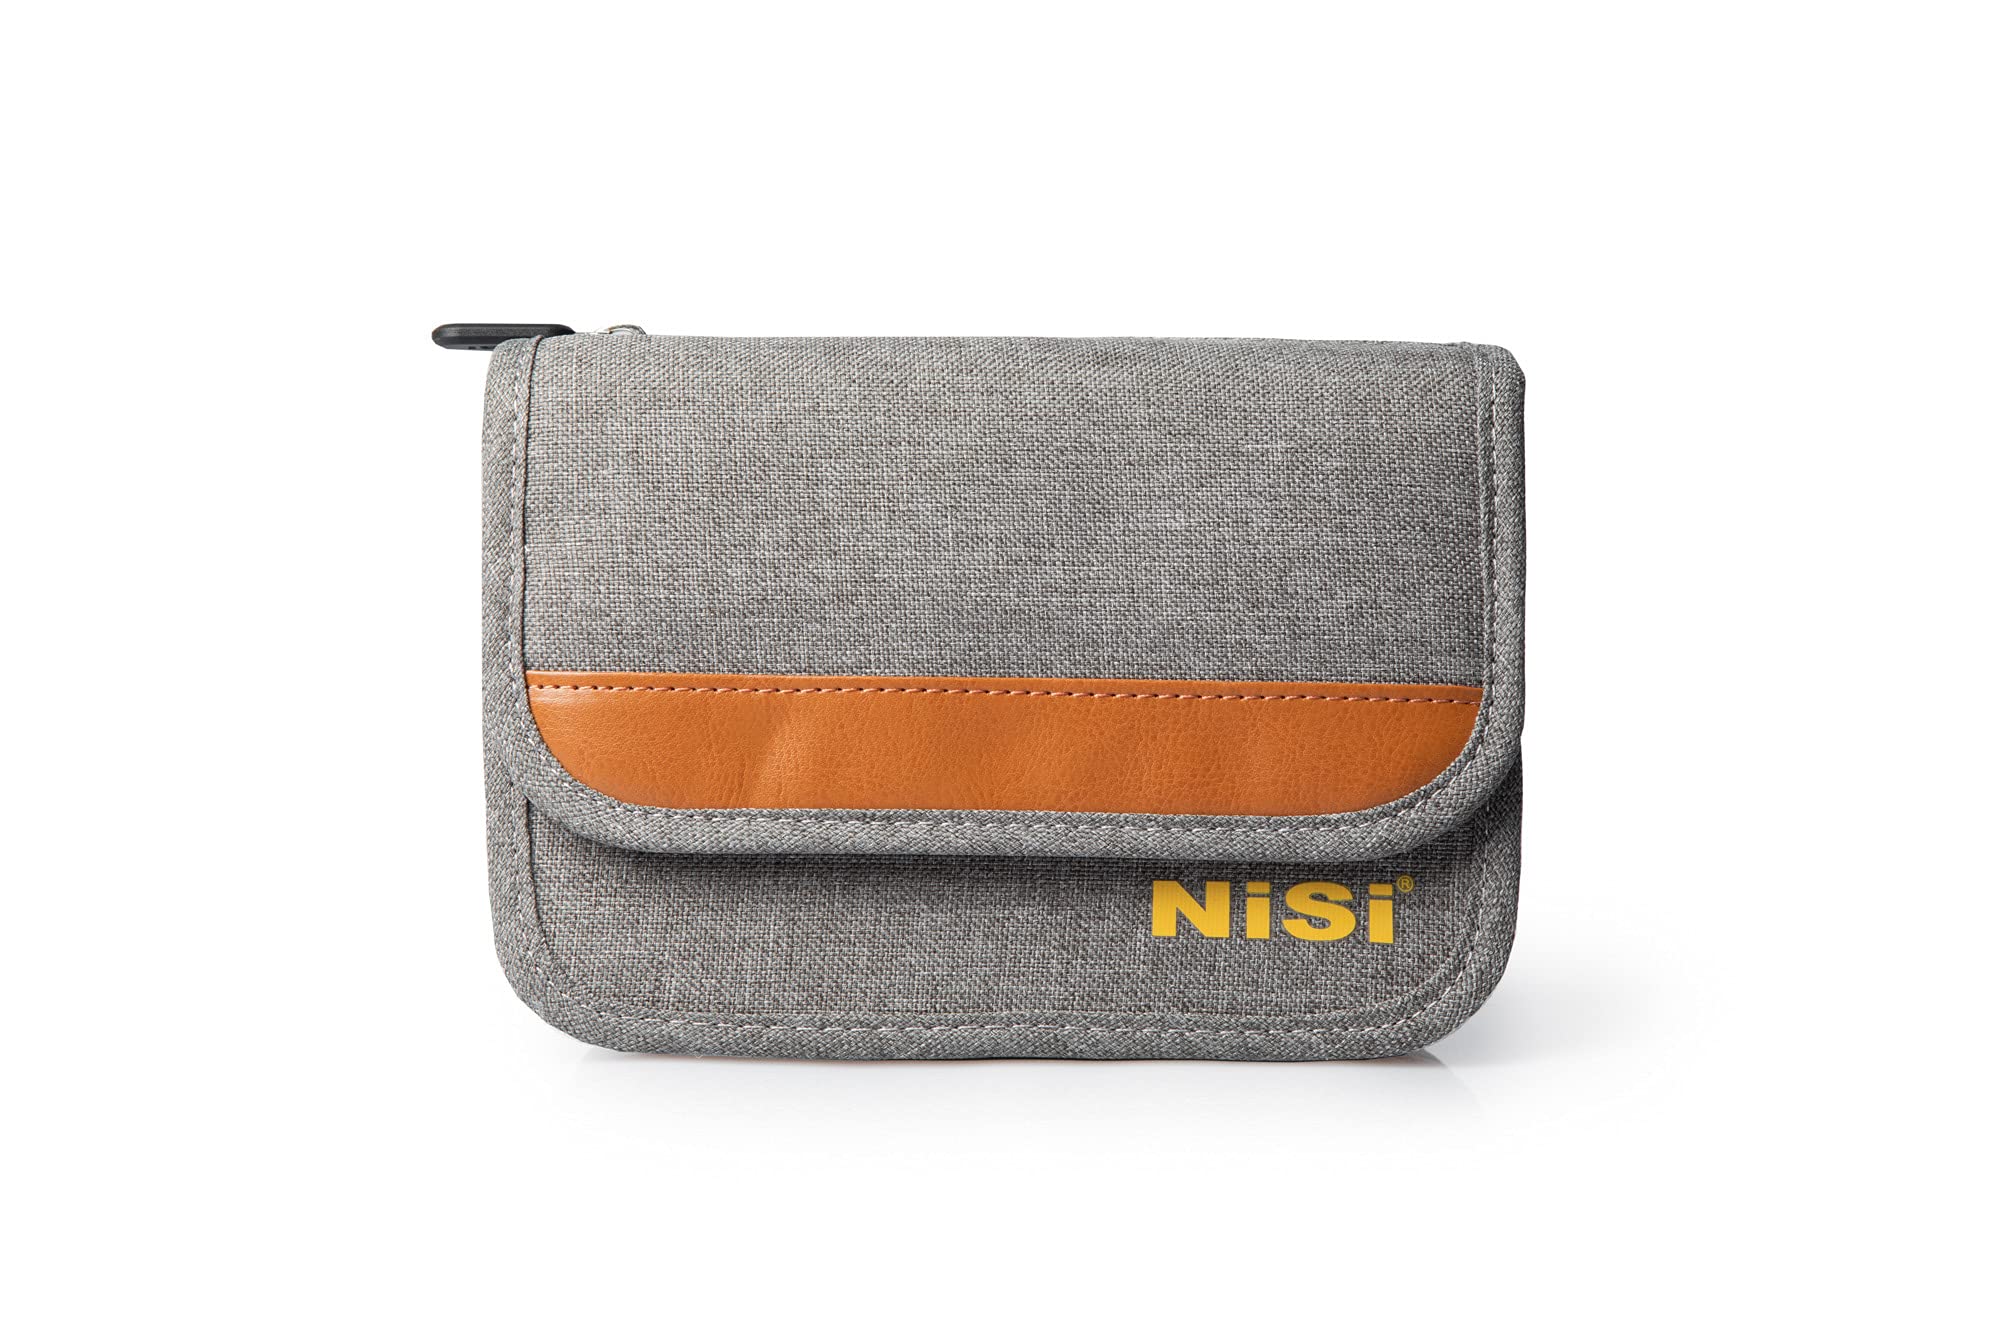 NiSi Caddy 9 Carry Pouch | Holds up to 9 Pcs Square (100x100mm) or Rectangular (100x150mm) Camera Lens Filters | Shock-Proof, Water Resistant, Easy Access, Straps for Cross-Body and Tripod Mounting